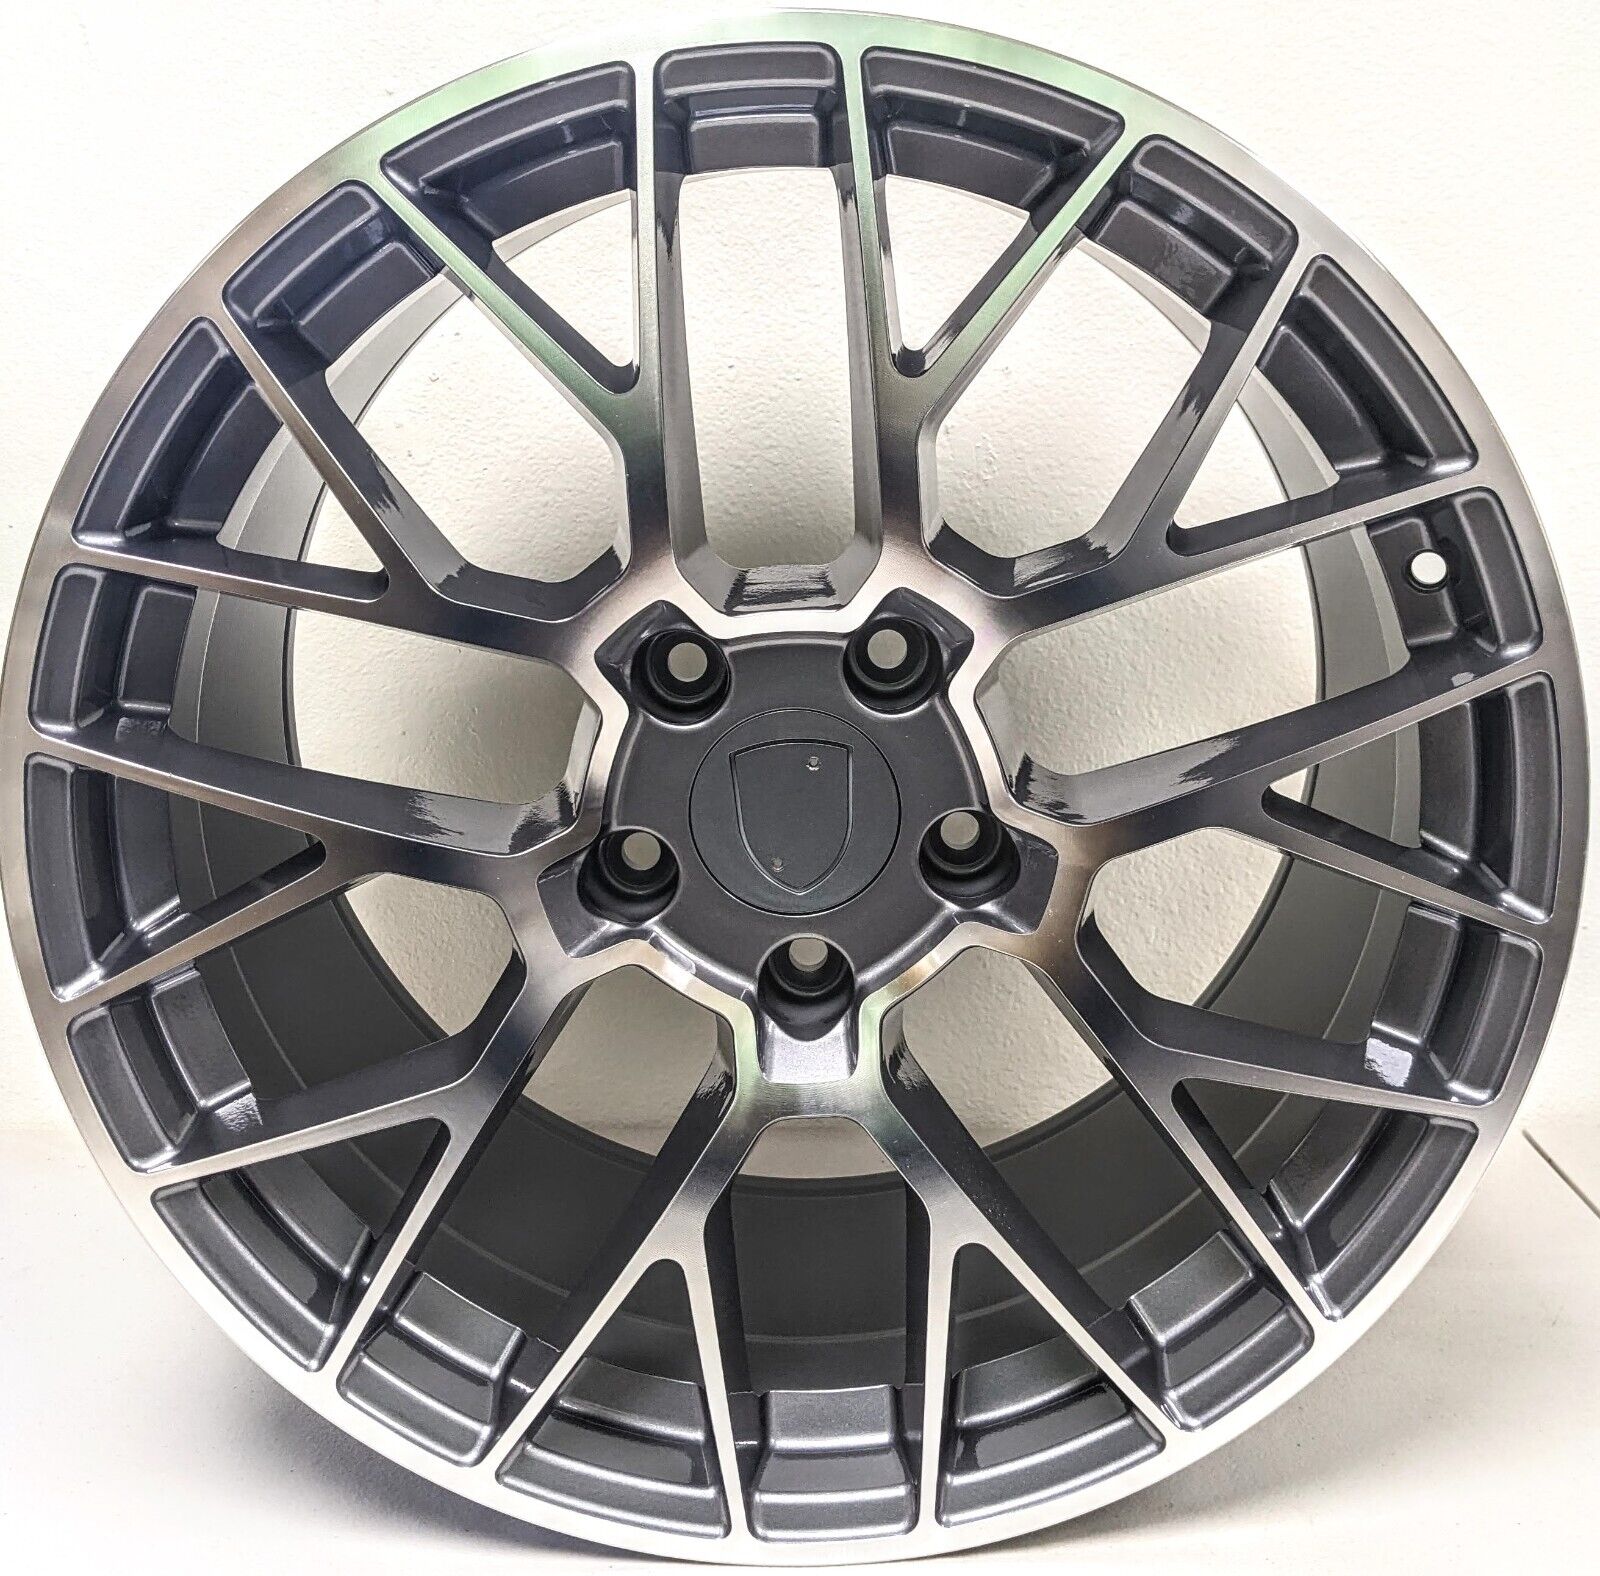 Set 4 wheels 20 STAGGERED RIMS 5x112 66.6 20x9 & 20x10 CLS500 CLS550 CLS63 AMG